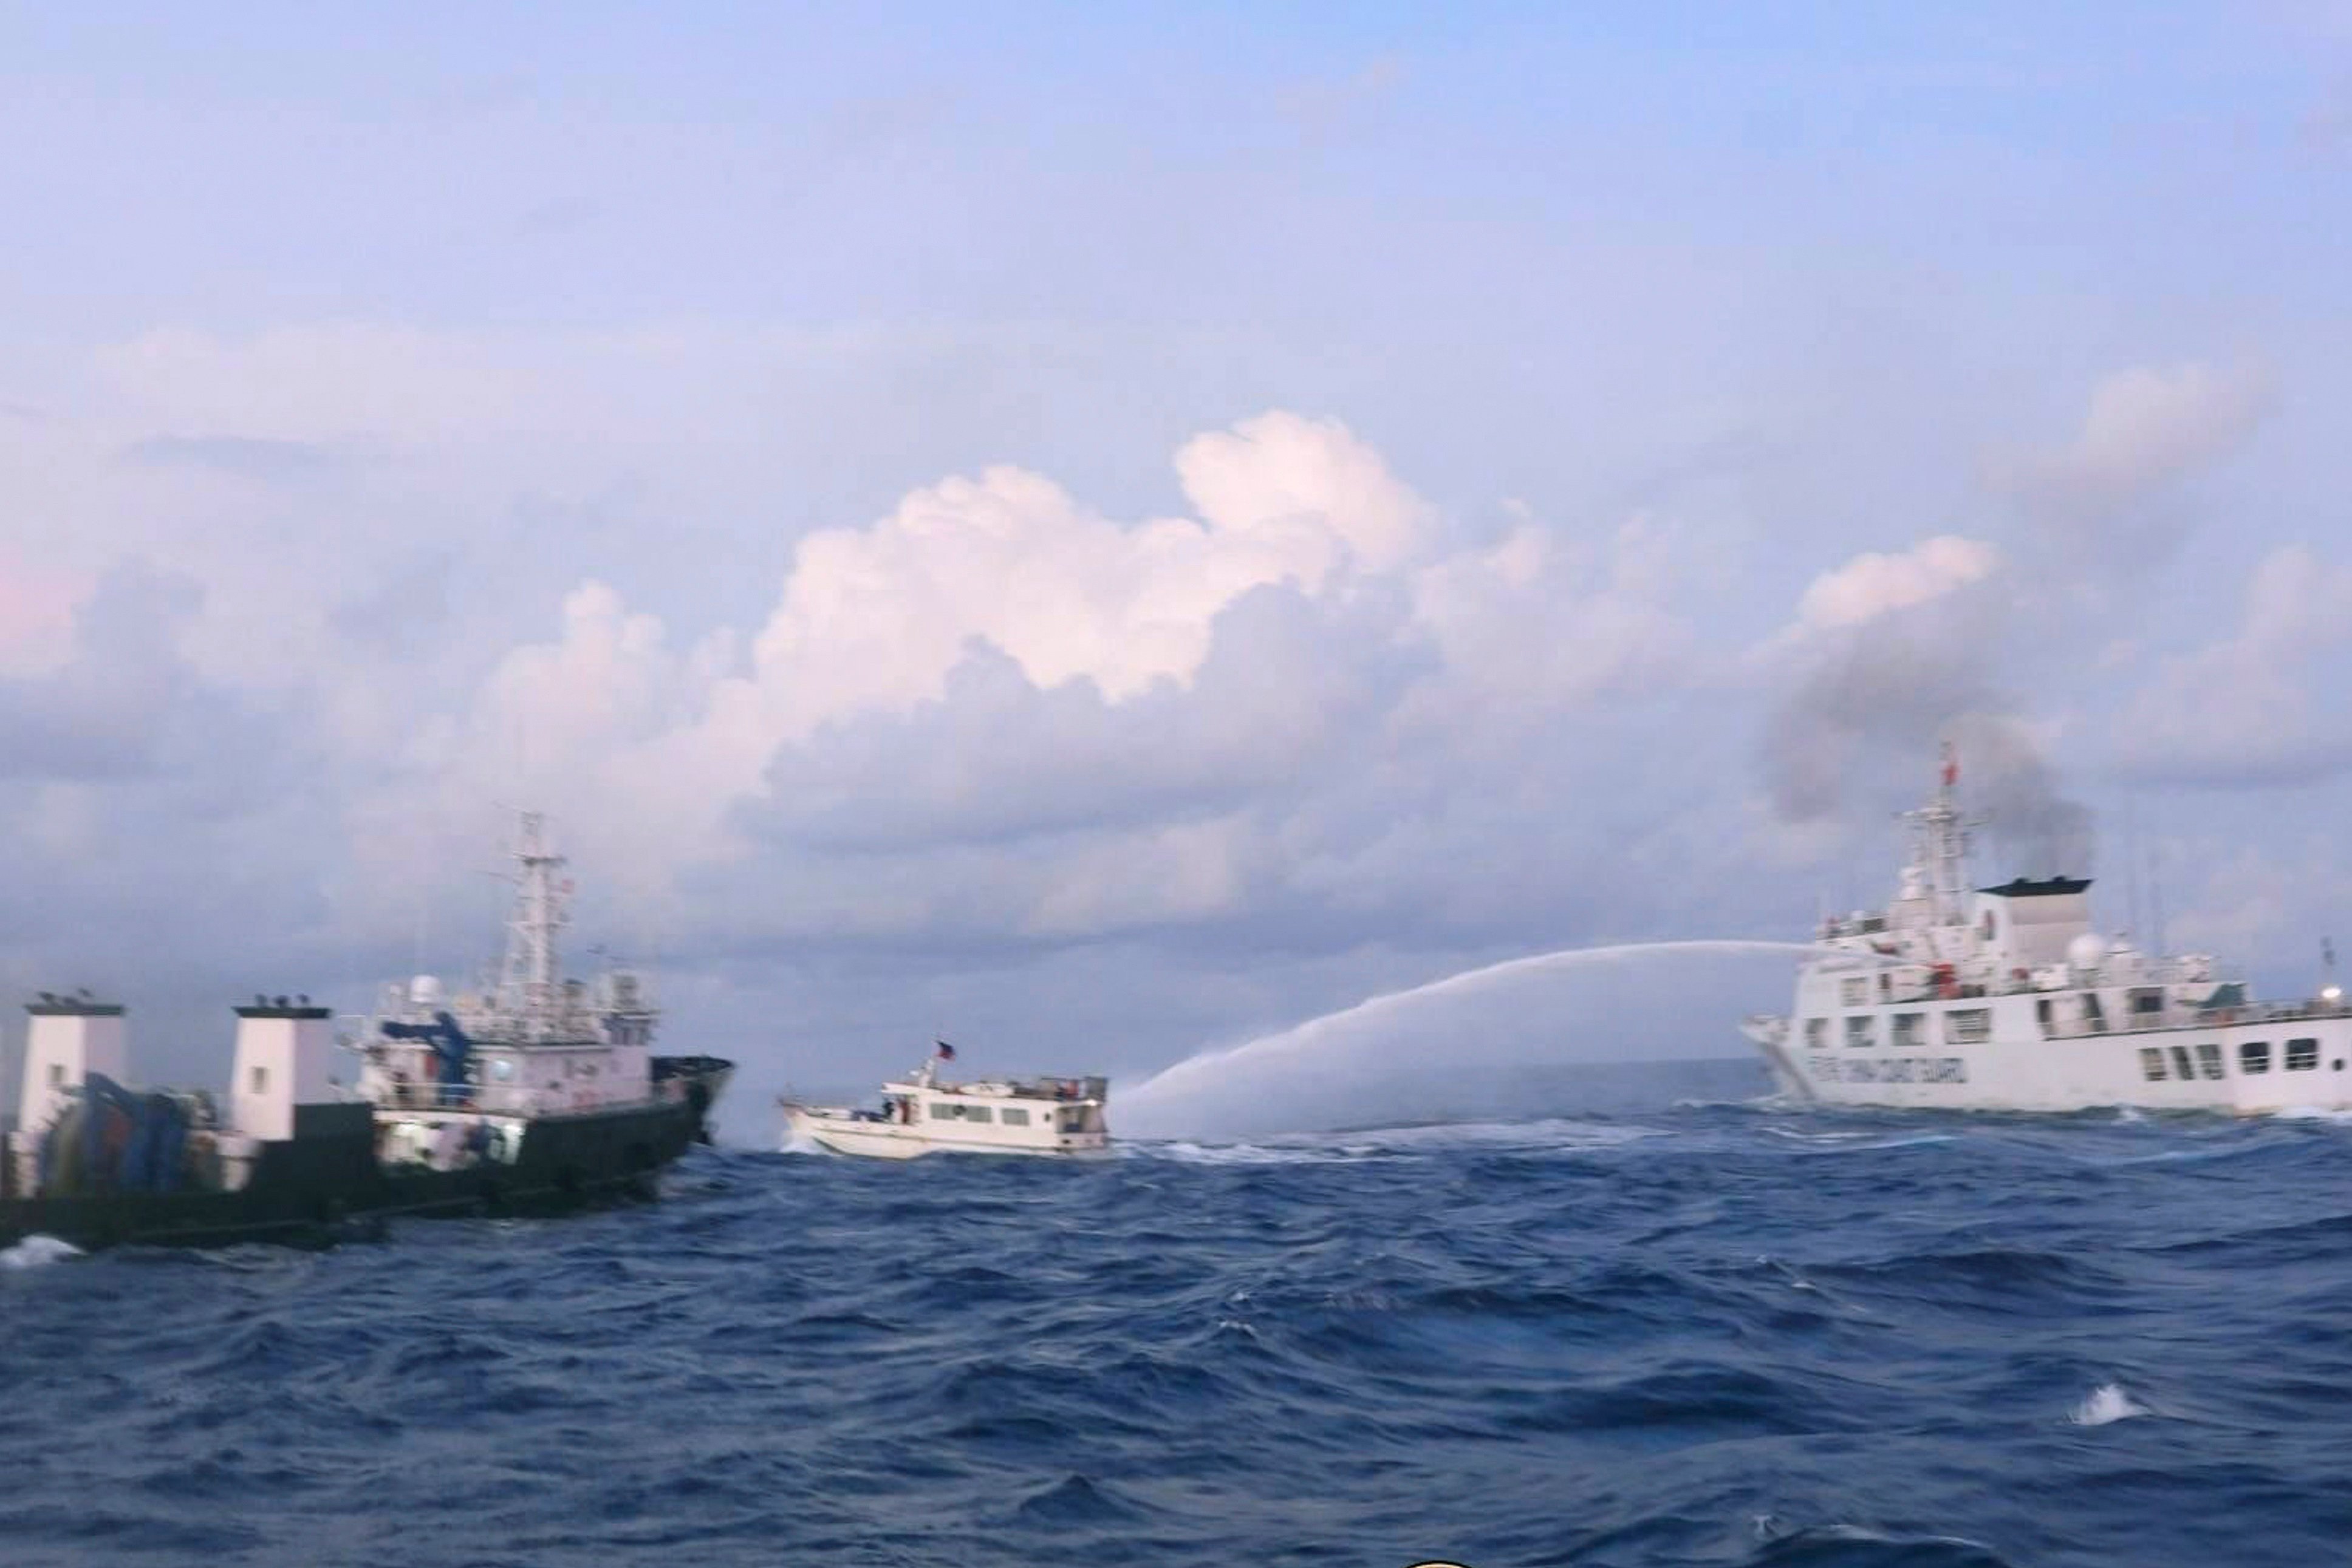 A Chinese Coast Guard ship uses water cannon on a Philippine supply boat as it approaches Second Thomas Shoal in the disputed South China Sea, on December 10. Photo: Handout from Philippine Coast Guard via AP